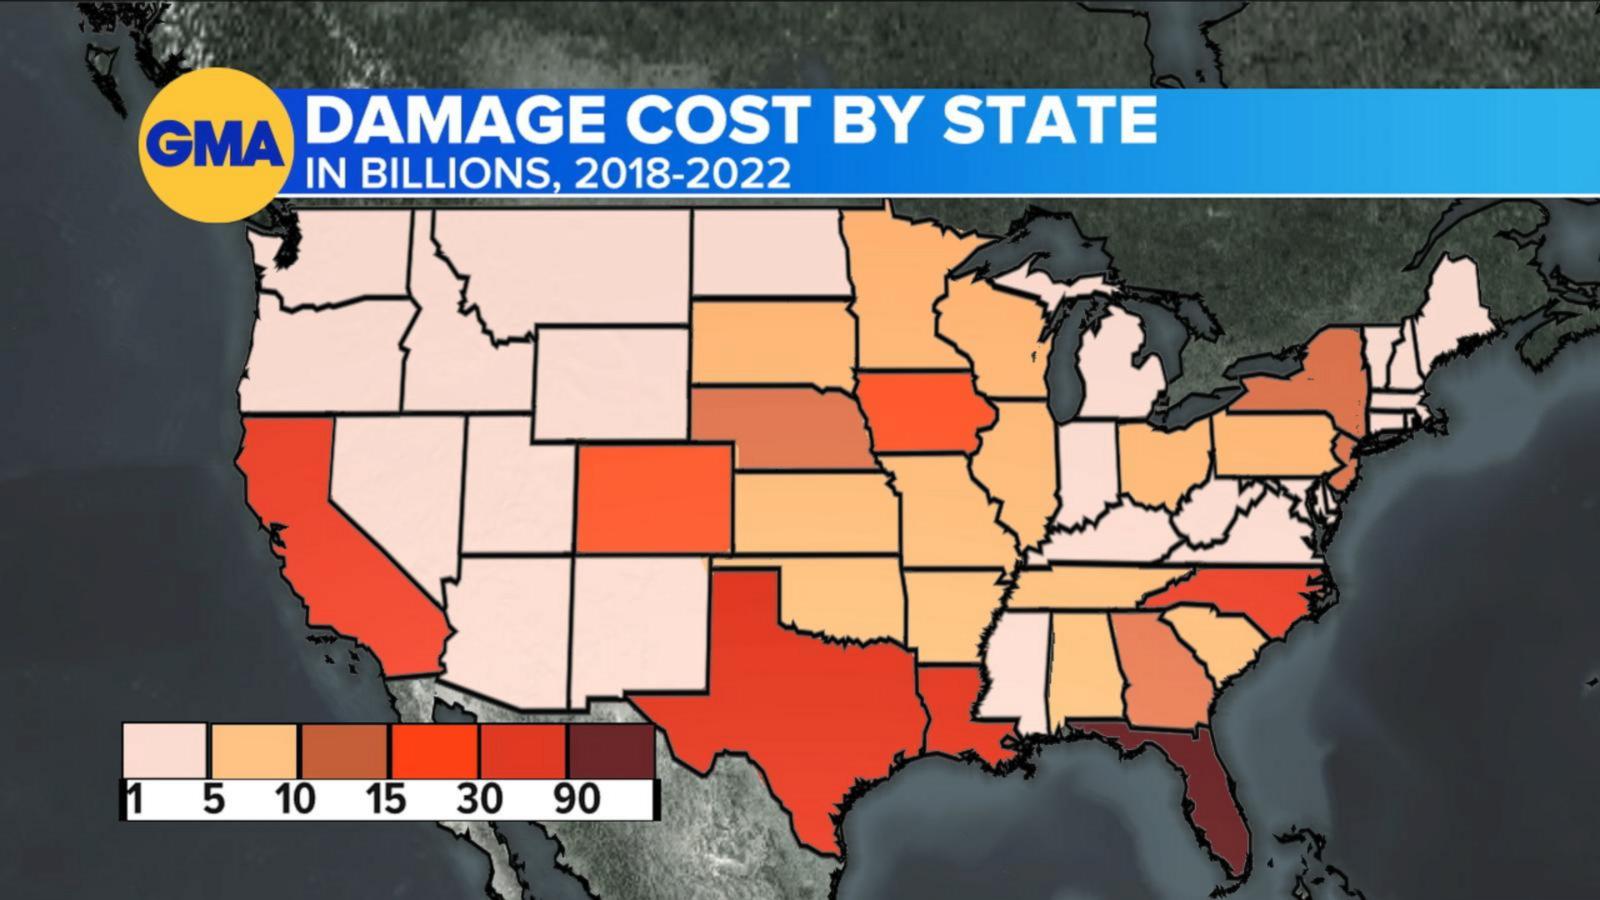 VIDEO: Effects of climate change worsening across US, new report says